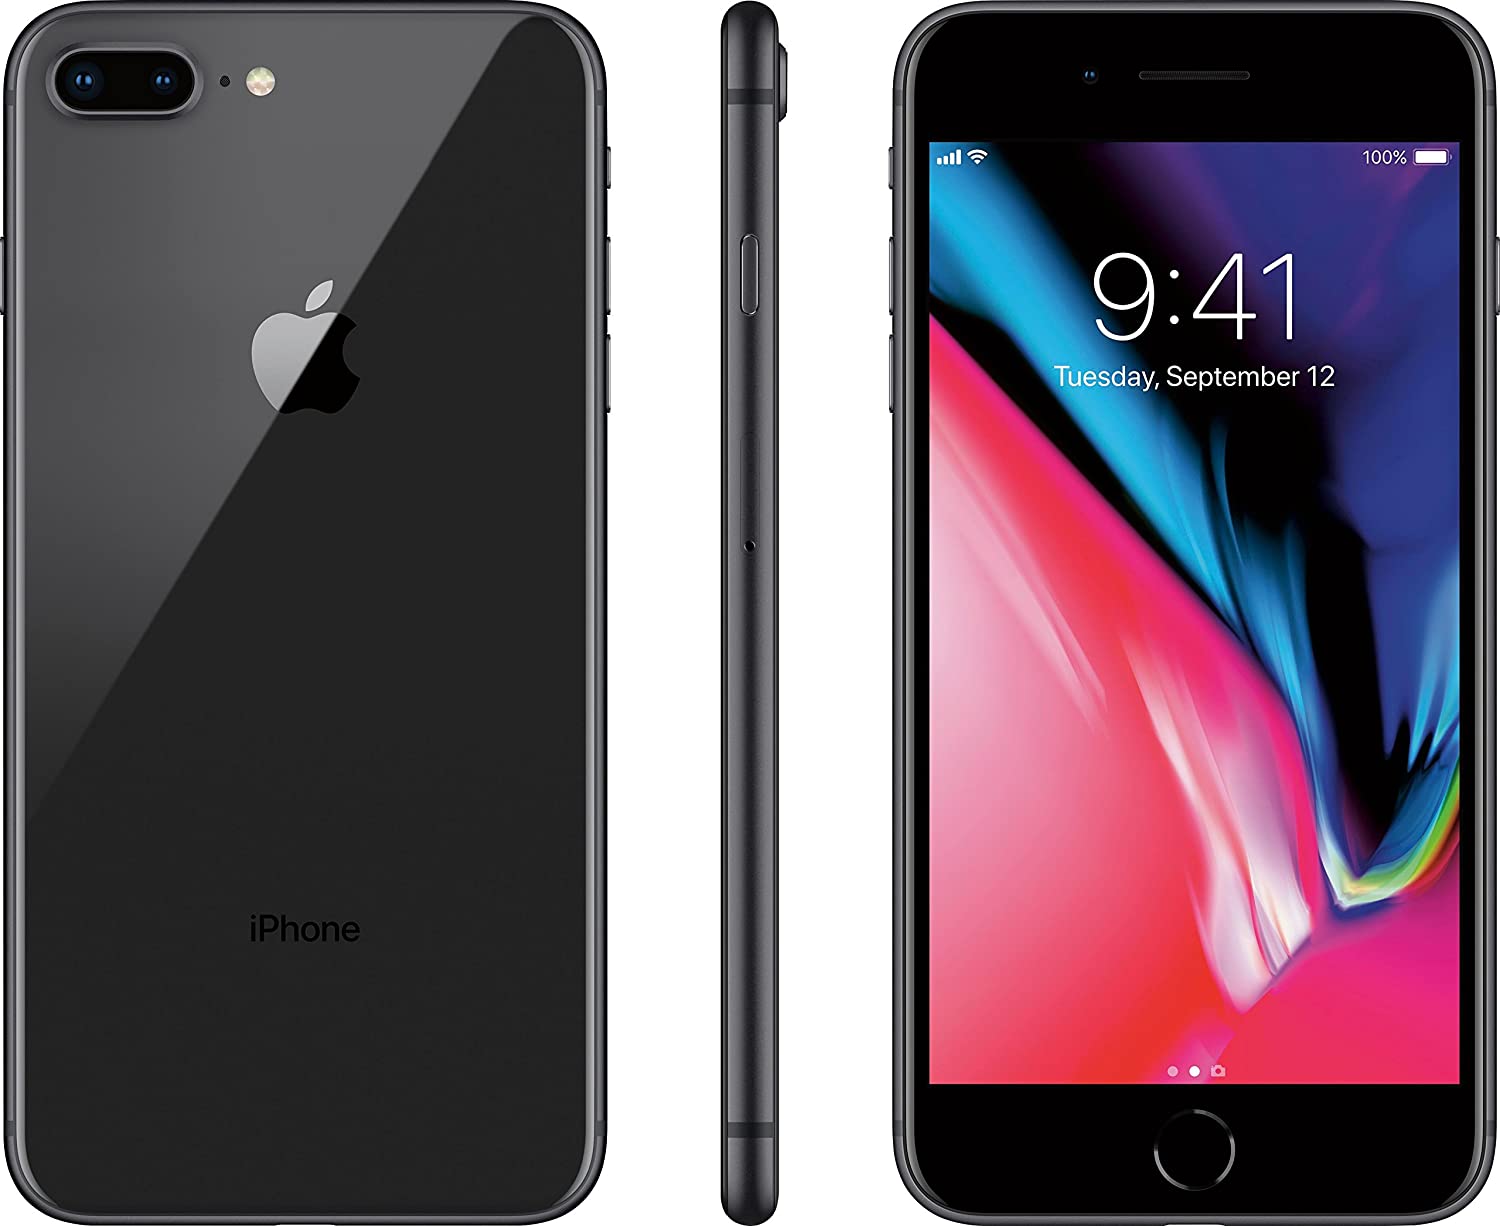 Copy of APPLE iPhone 8 Plus 256GB A1897 UNLOCKED SMARTPHONE-BLK  Refurbished with Charger - Atlas Computers & Electronics 